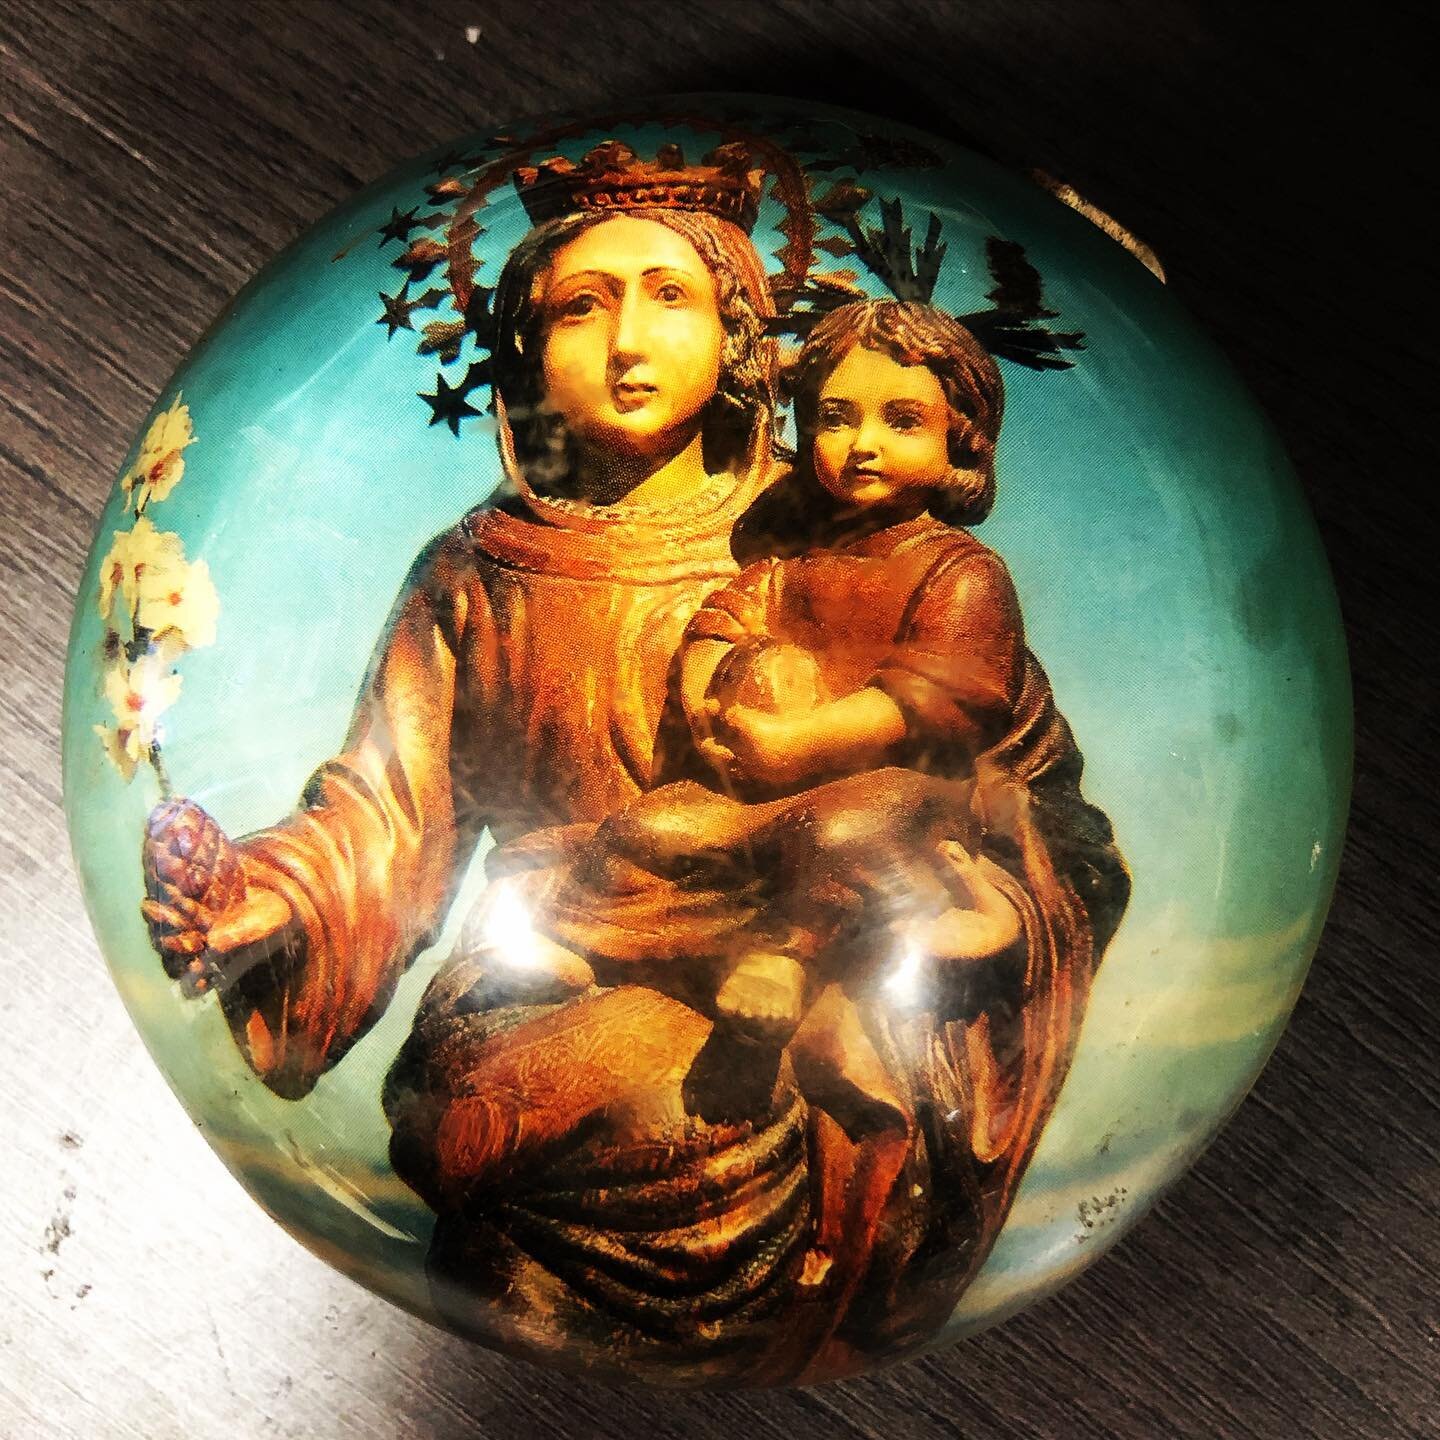 Ultra religious paper weights making a comeback #raval